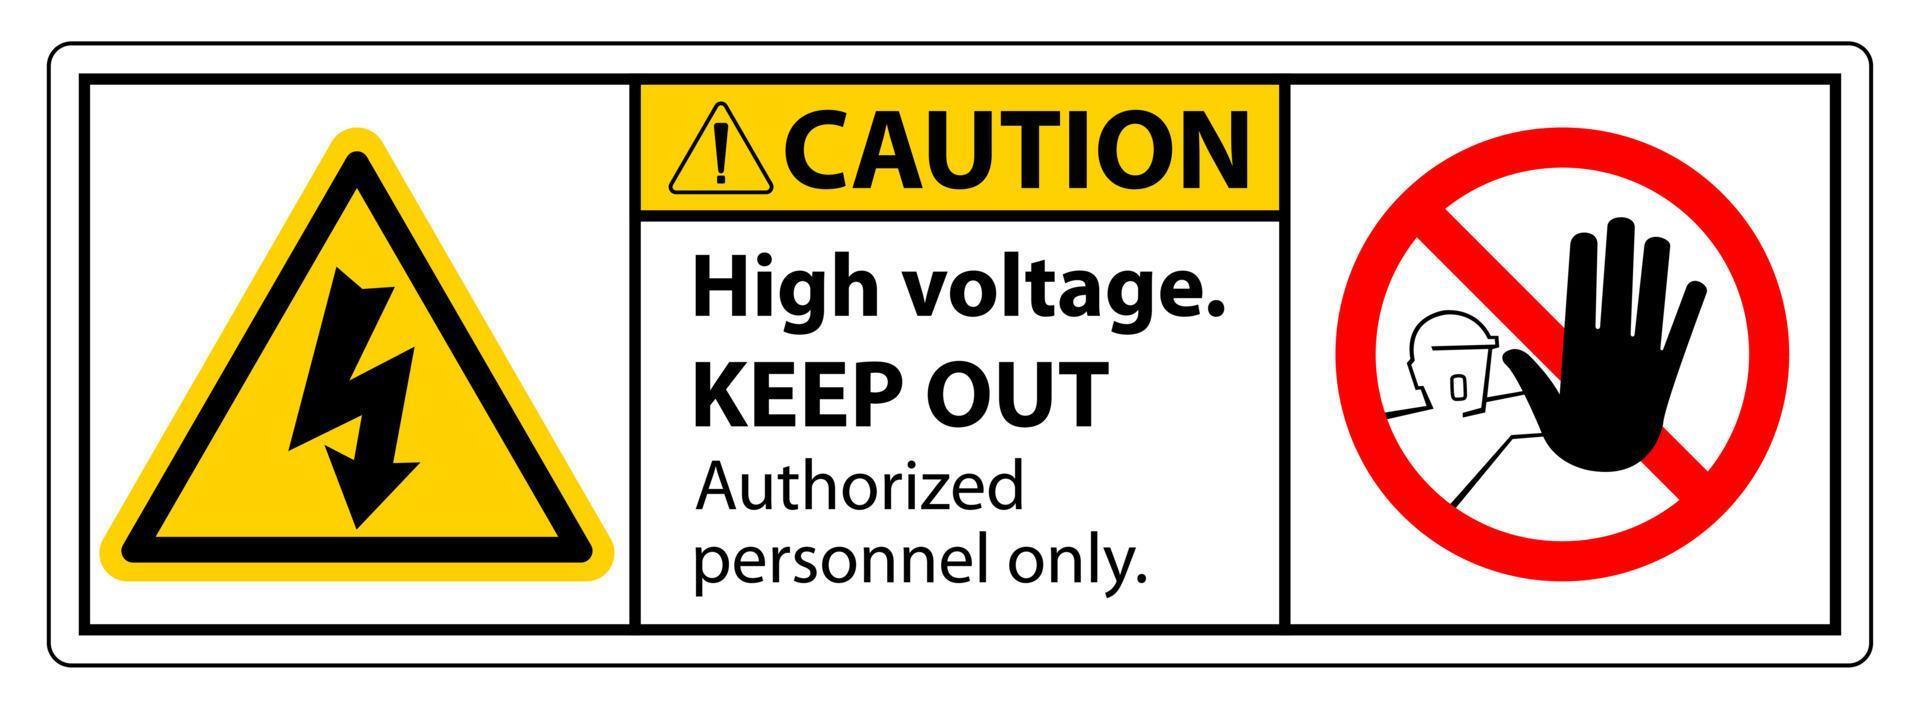 Caution High Voltage Keep Out Sign Isolate On White Background,Vector Illustration EPS.10 vector